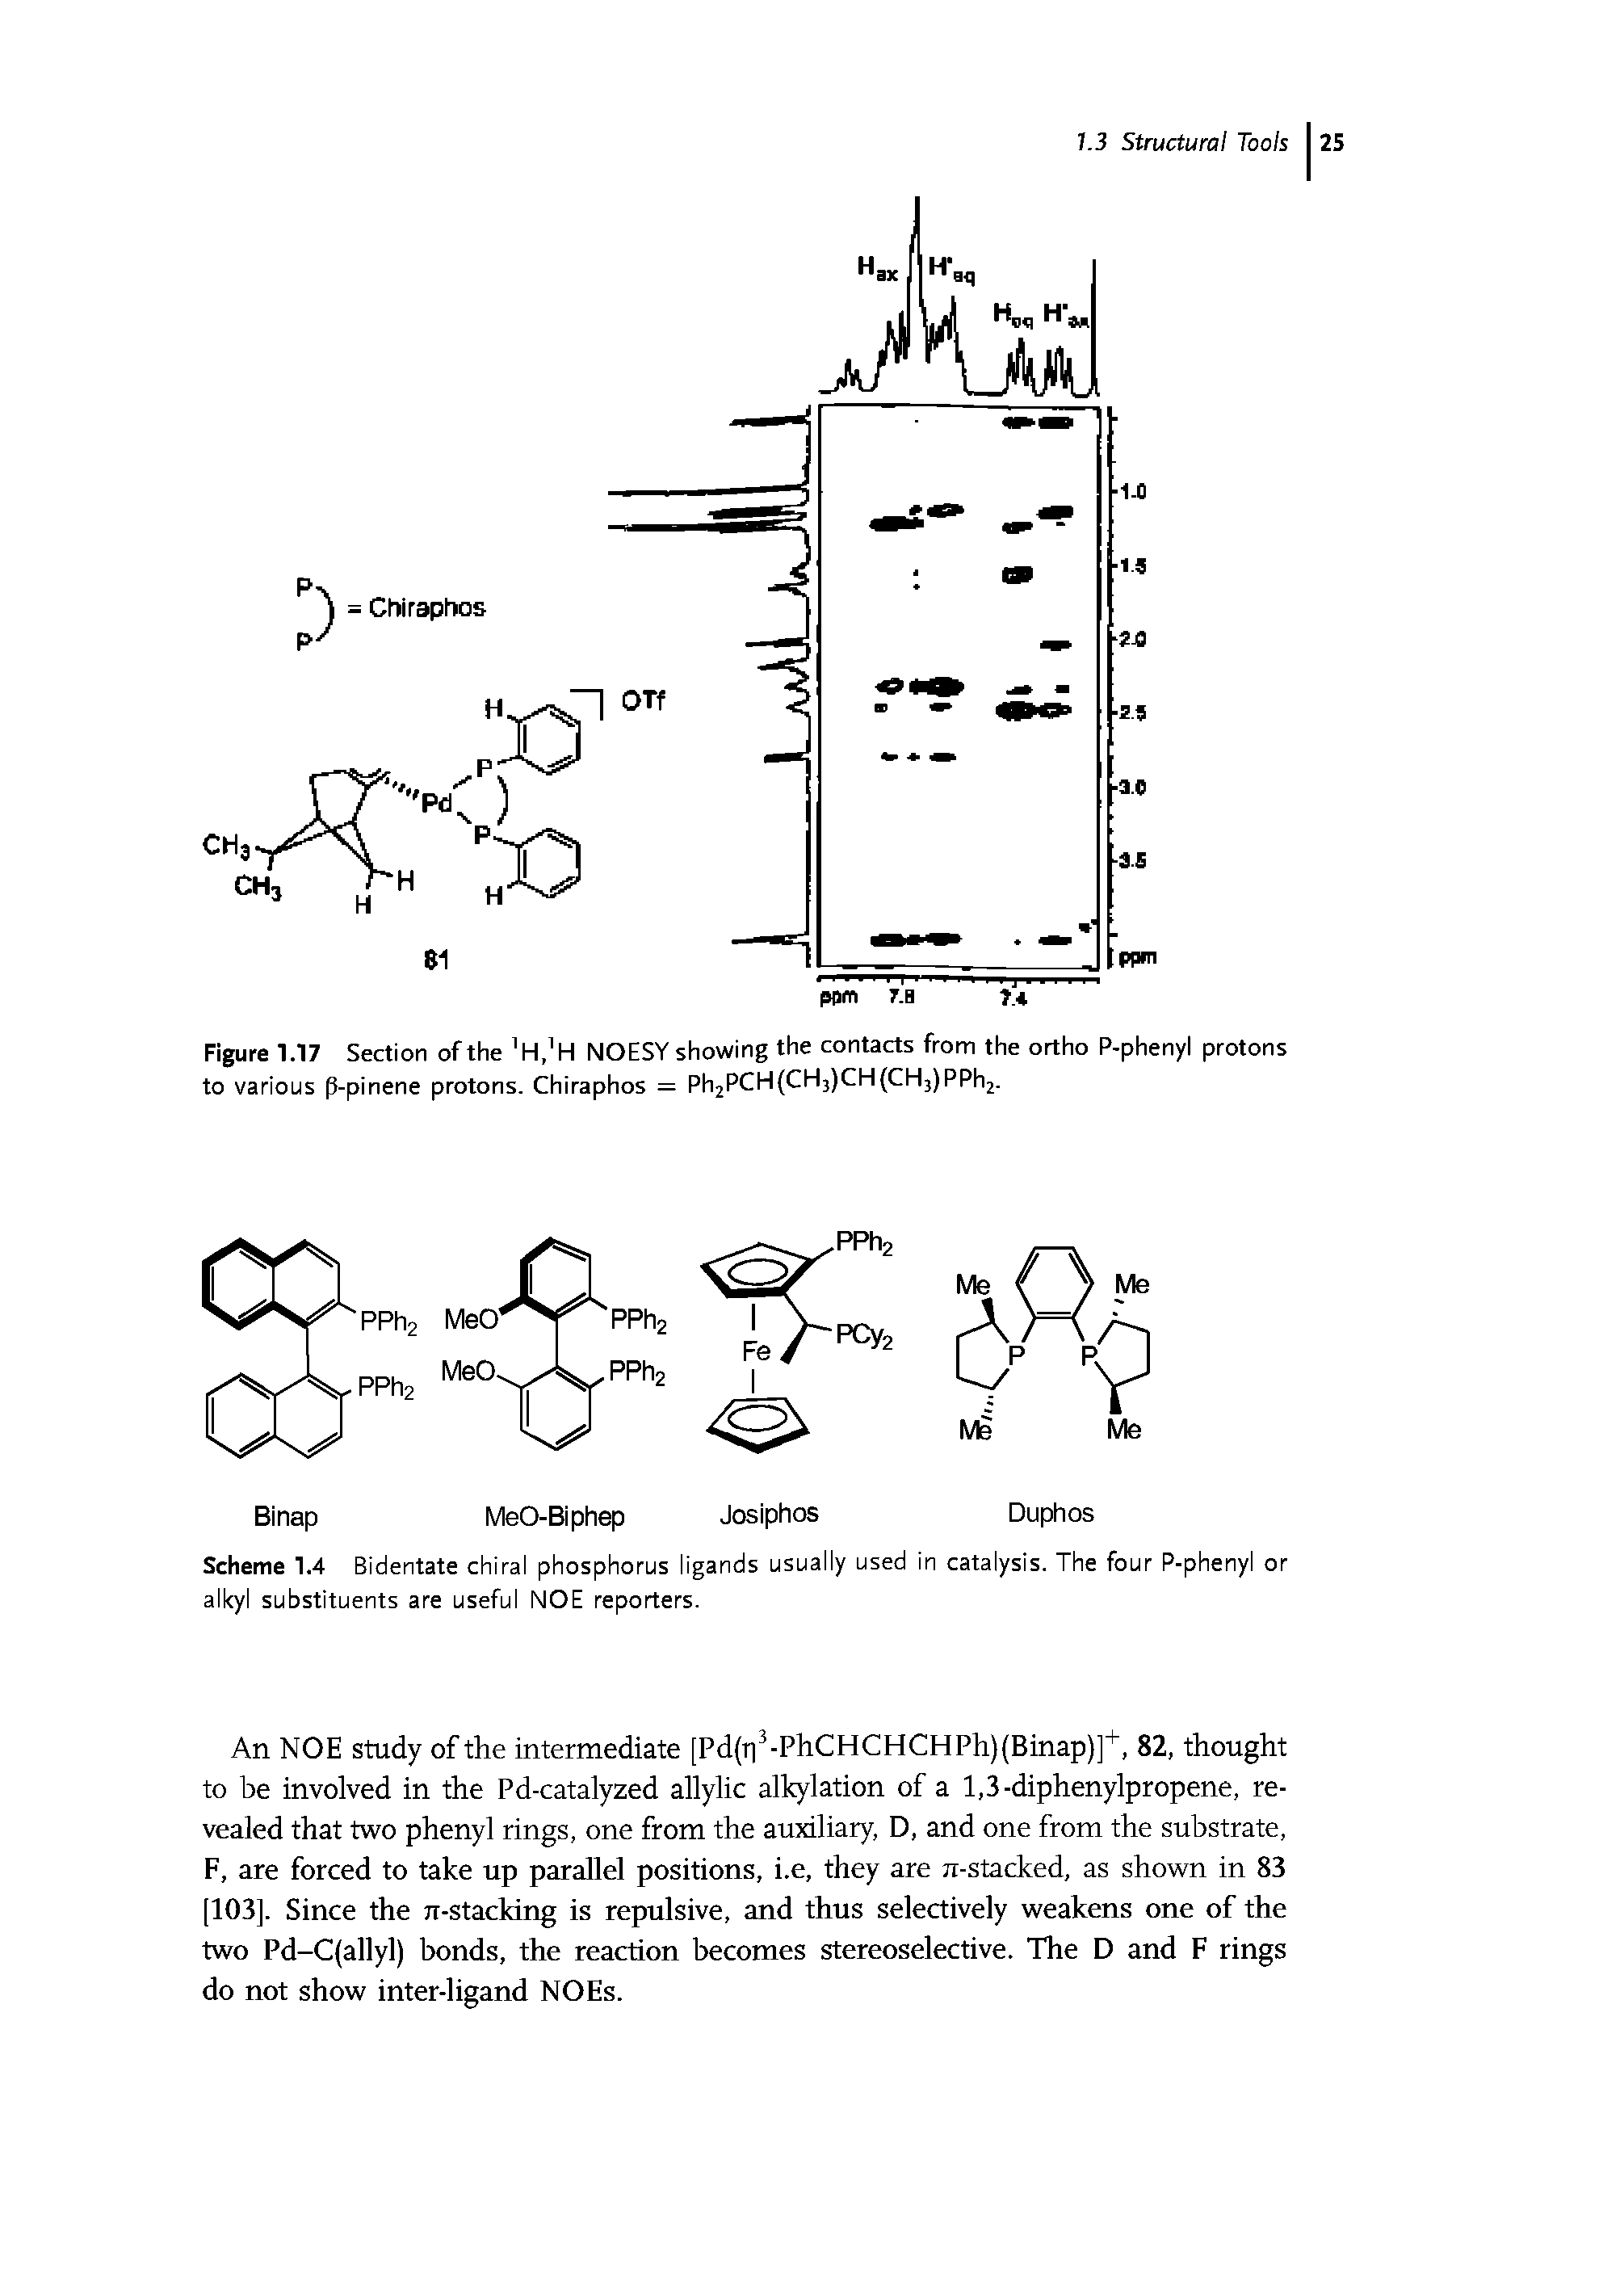 Figure 1.17 Section ofthe H, H NOESY showing the contacts from the ortho P-phenyl protons to various p-pinene protons. Chiraphos = Ph2pCH(CH3)CH(CH3)PPh2.